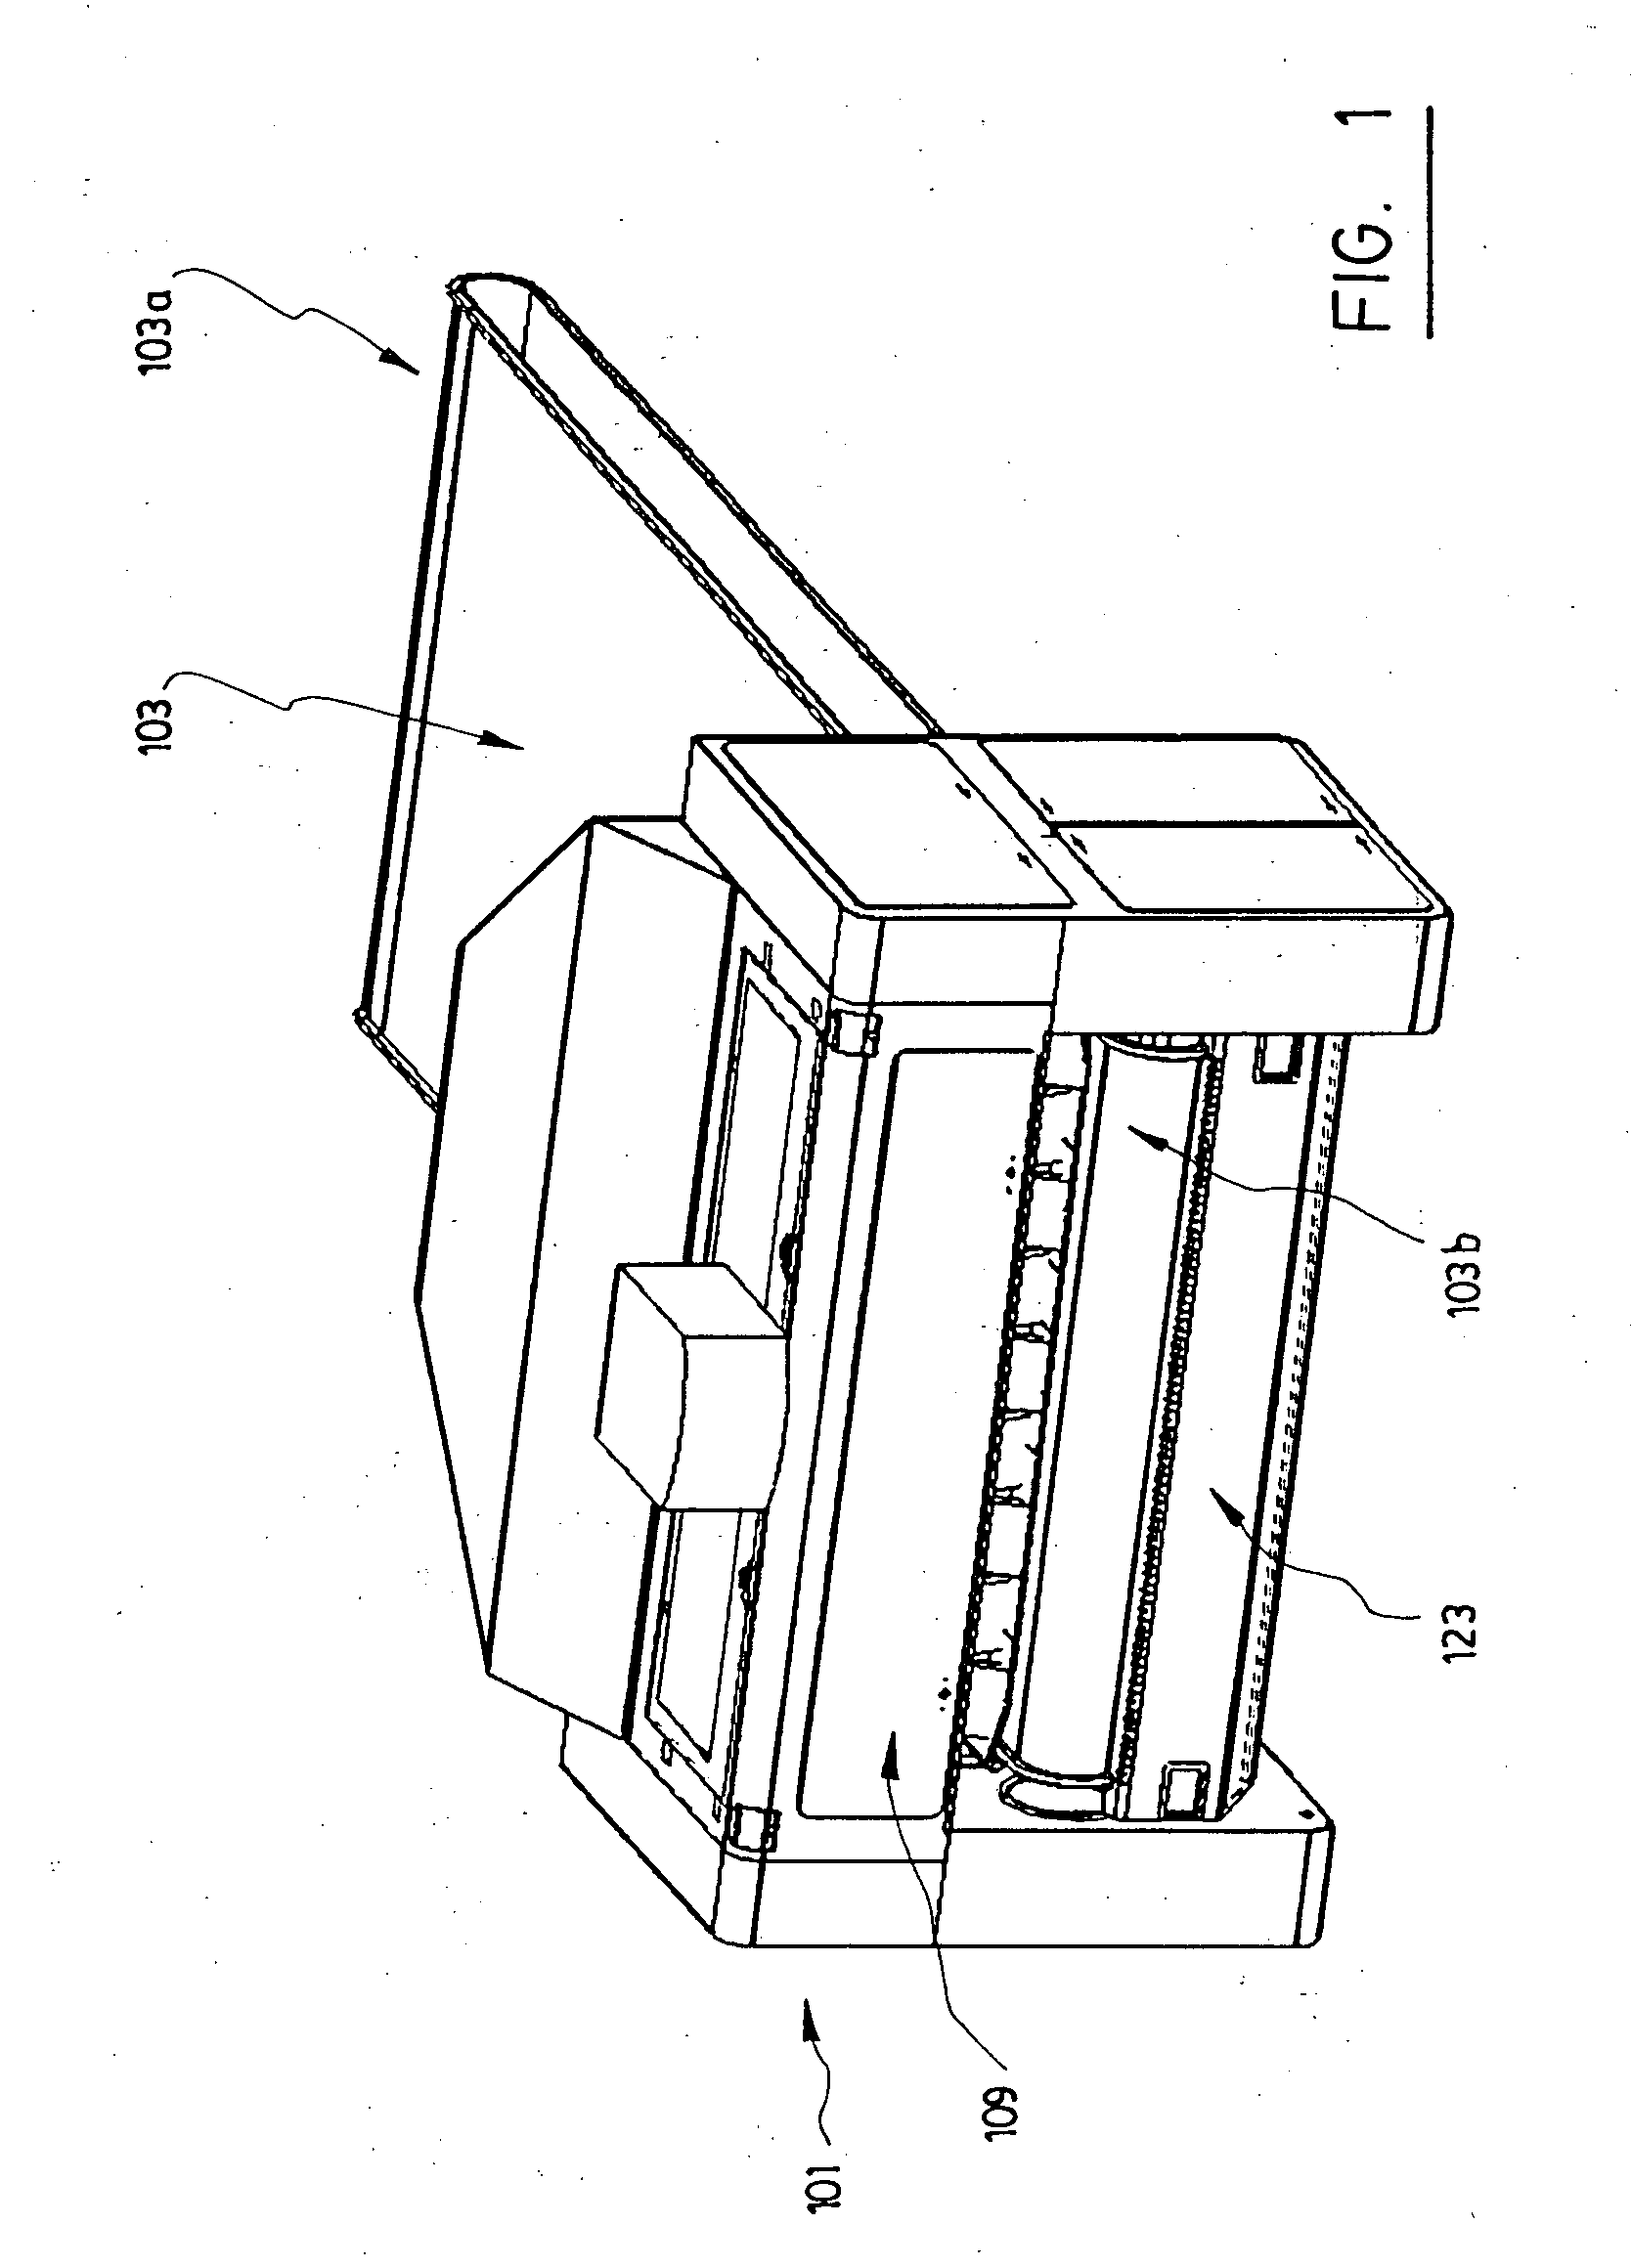 System and method for identifying and sorting material